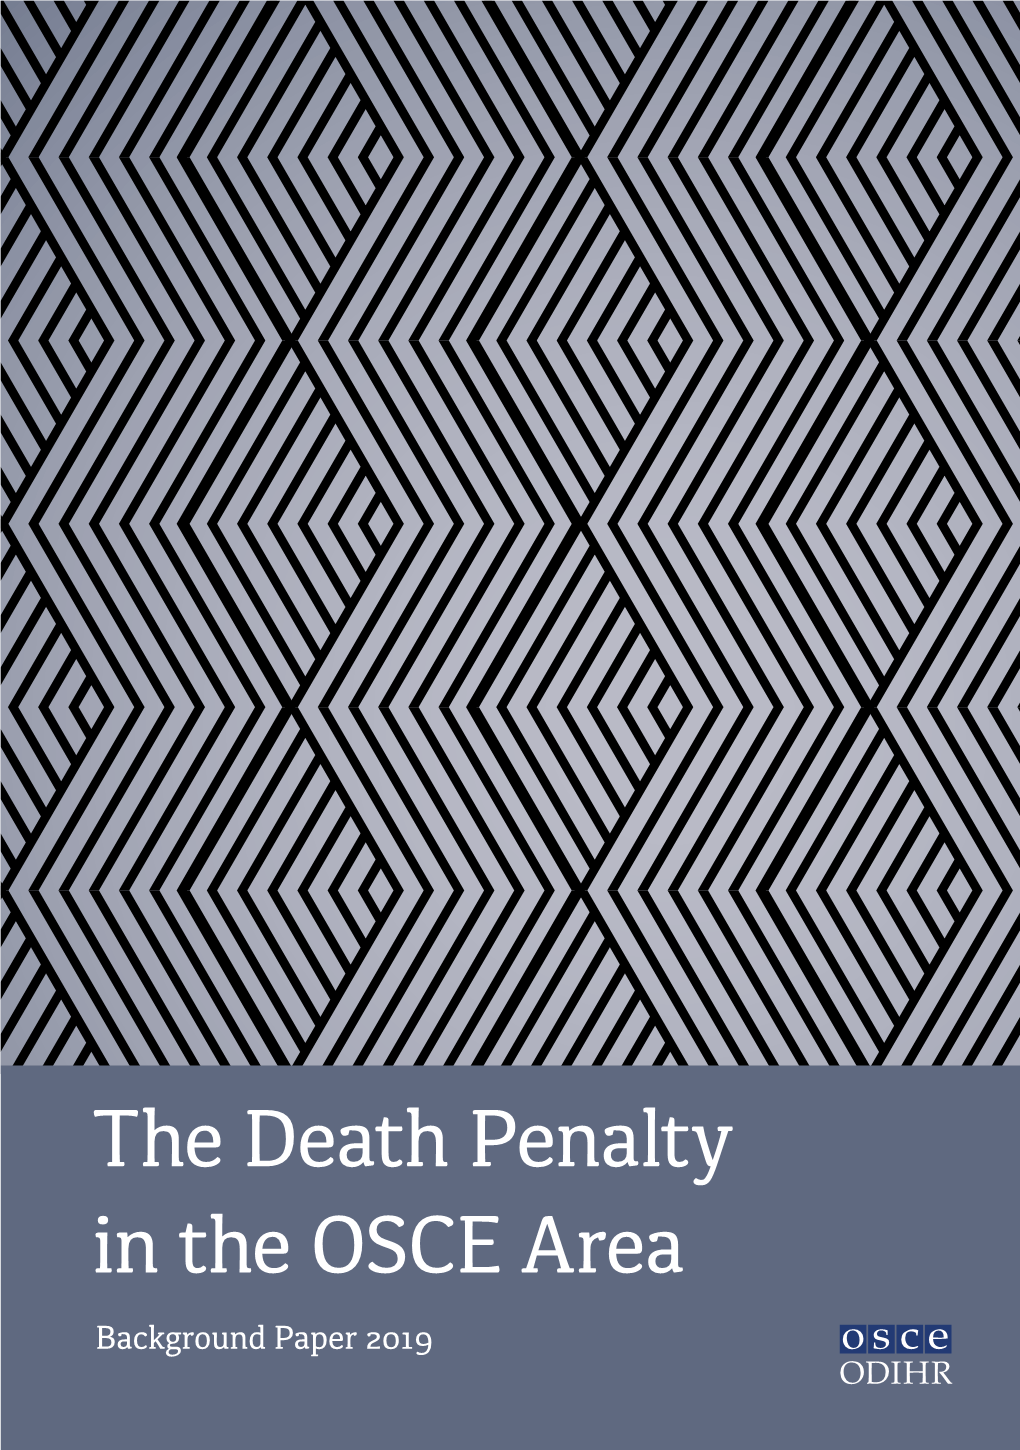 The Death Penalty in the OSCE Area: Background Paper 2019